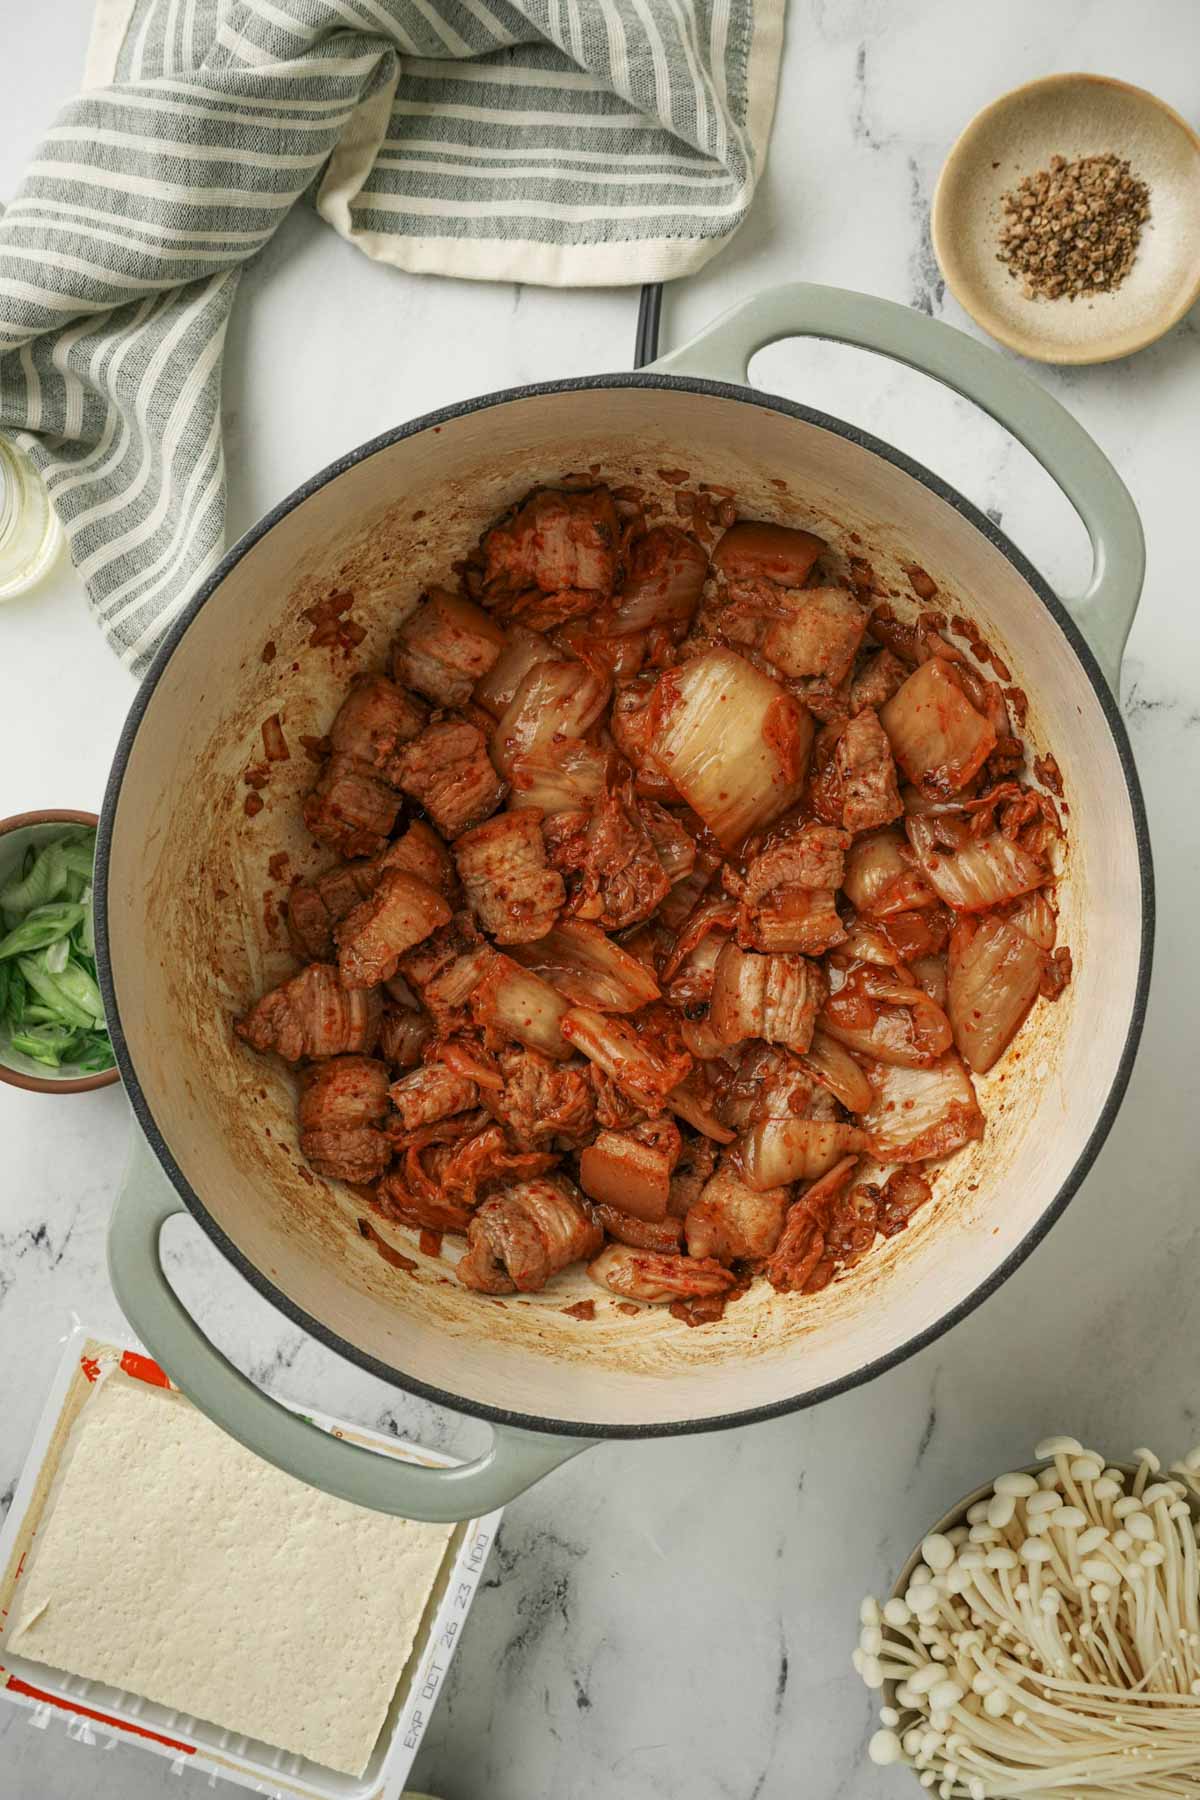 pork and kimchi being coked in a pot